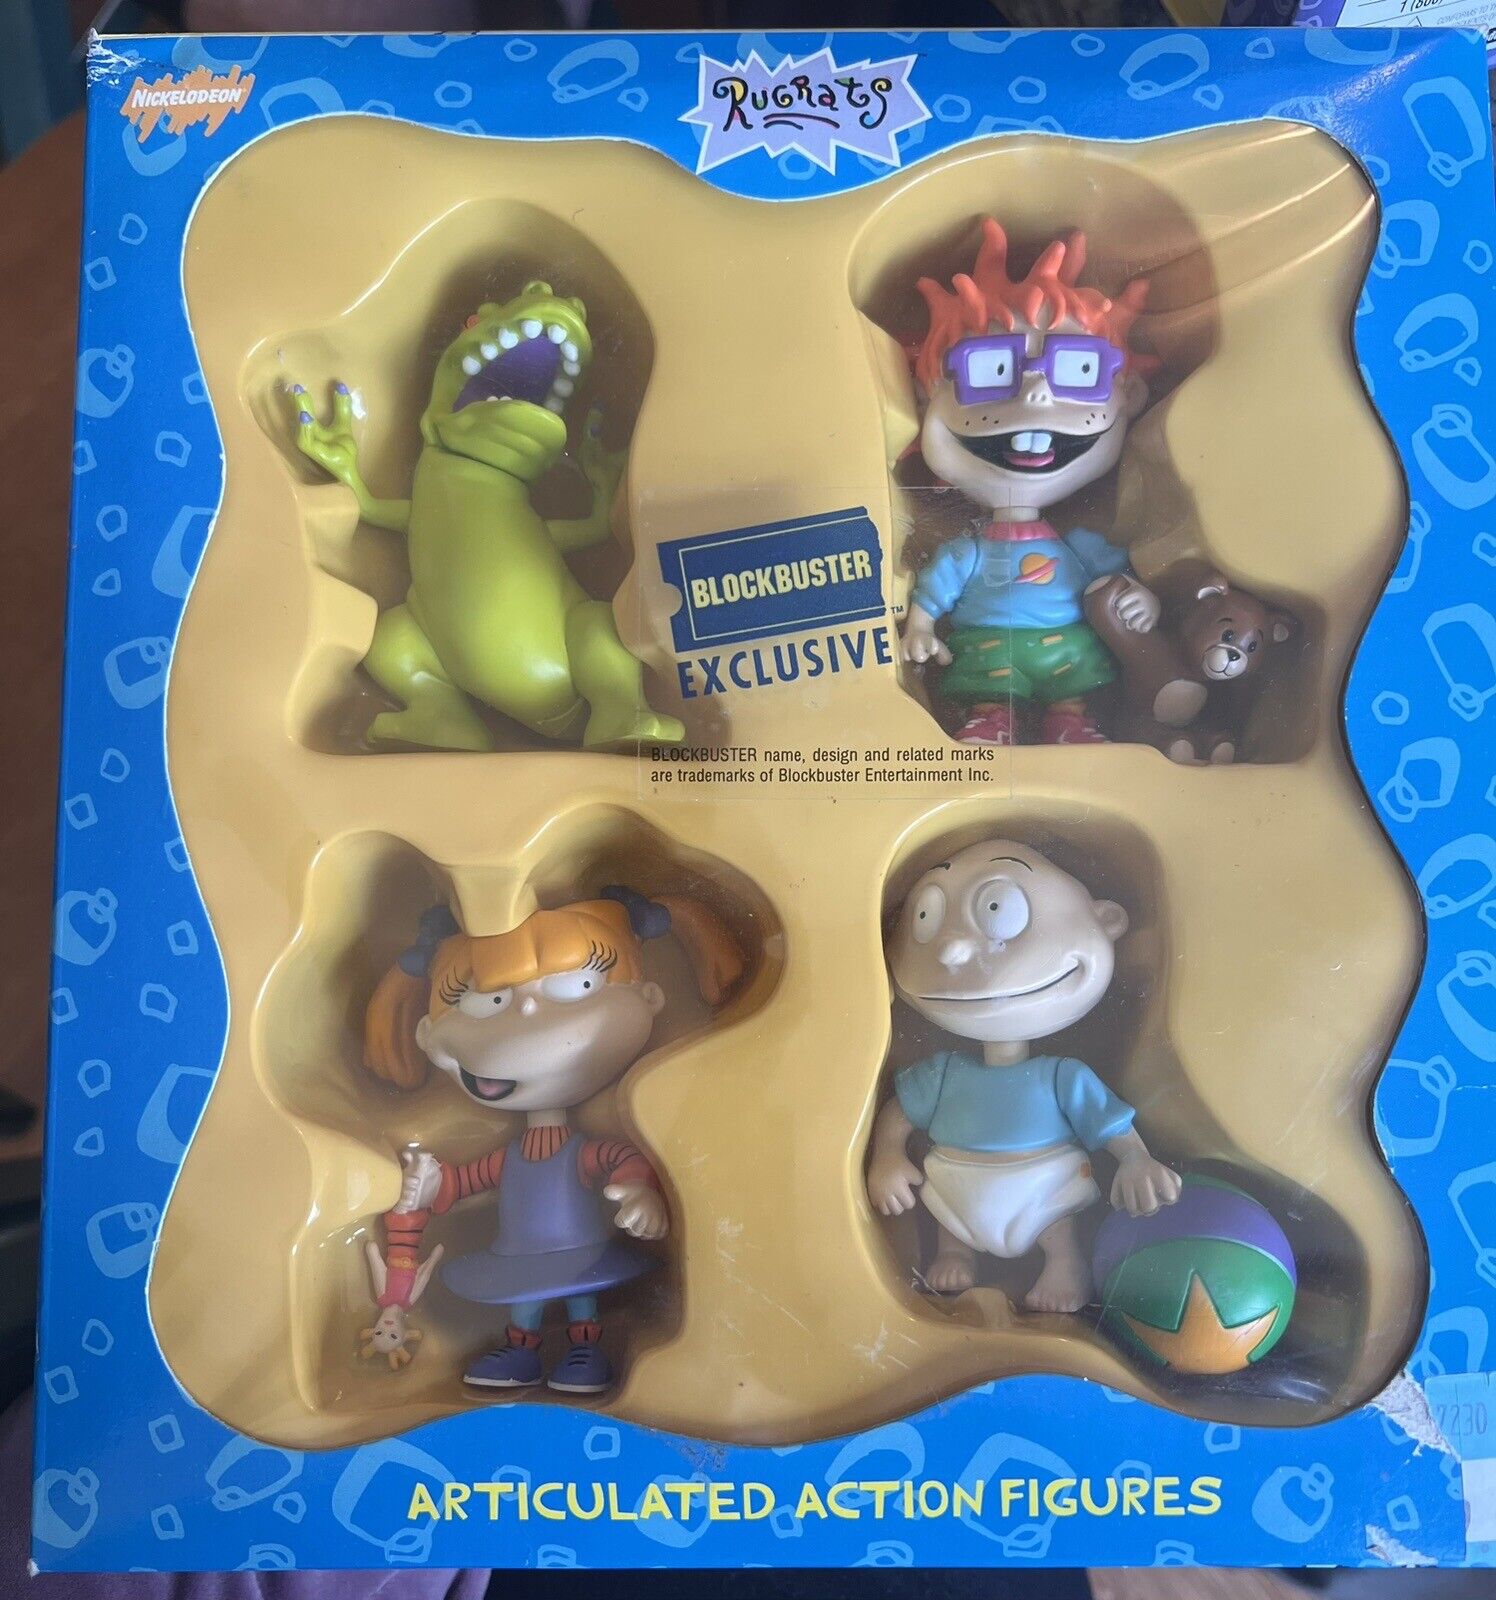 RUGRATS 1997 NICKELODEON Blockbuster Vintage Articulated Action Figures Box Set